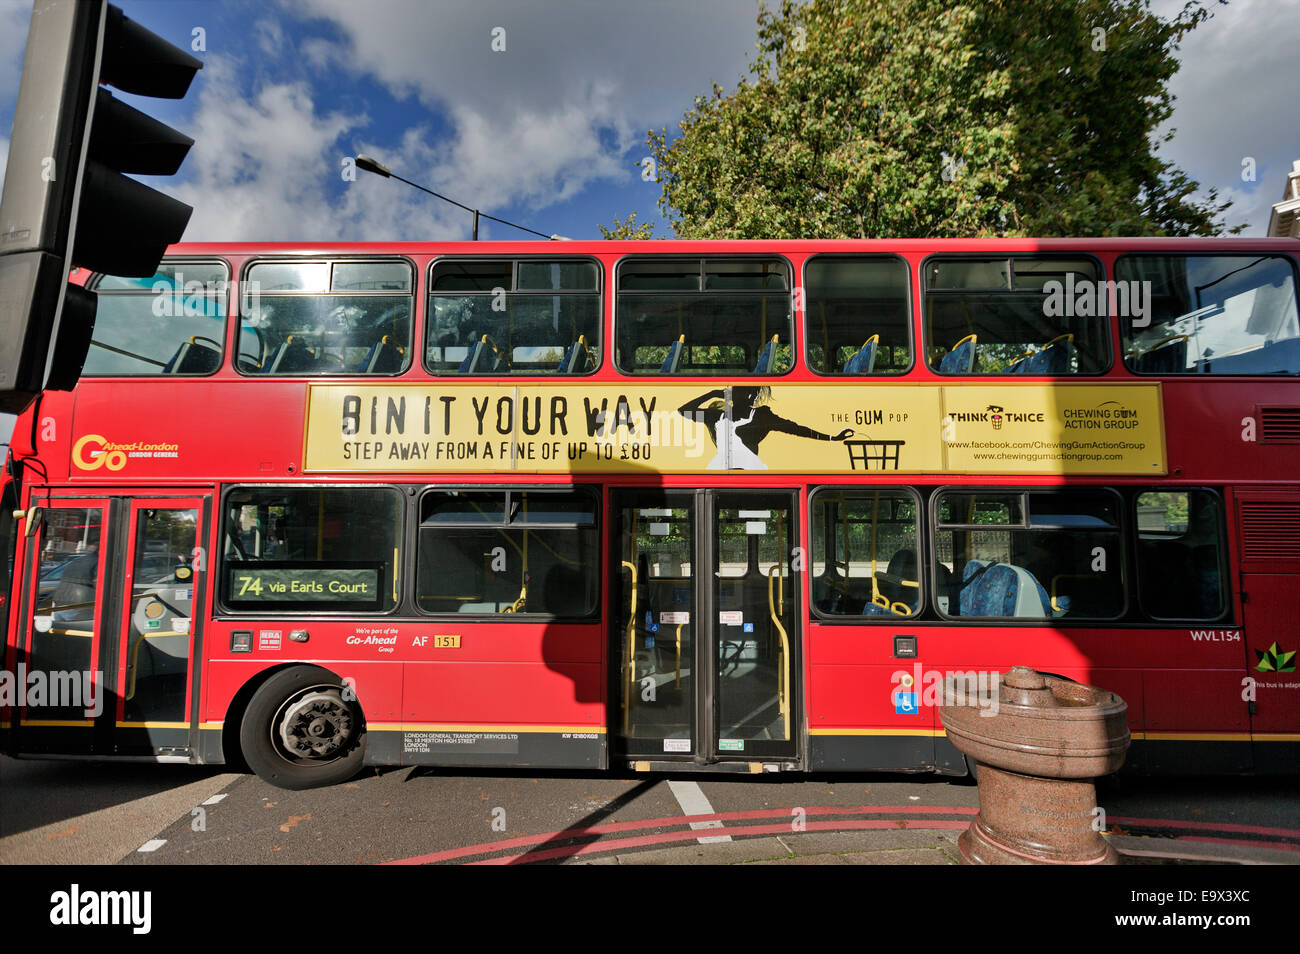 £80 fine for inappropriate disposal of chewing gum, warning sign on red bus, Baker Street, London, England, UK Stock Photo